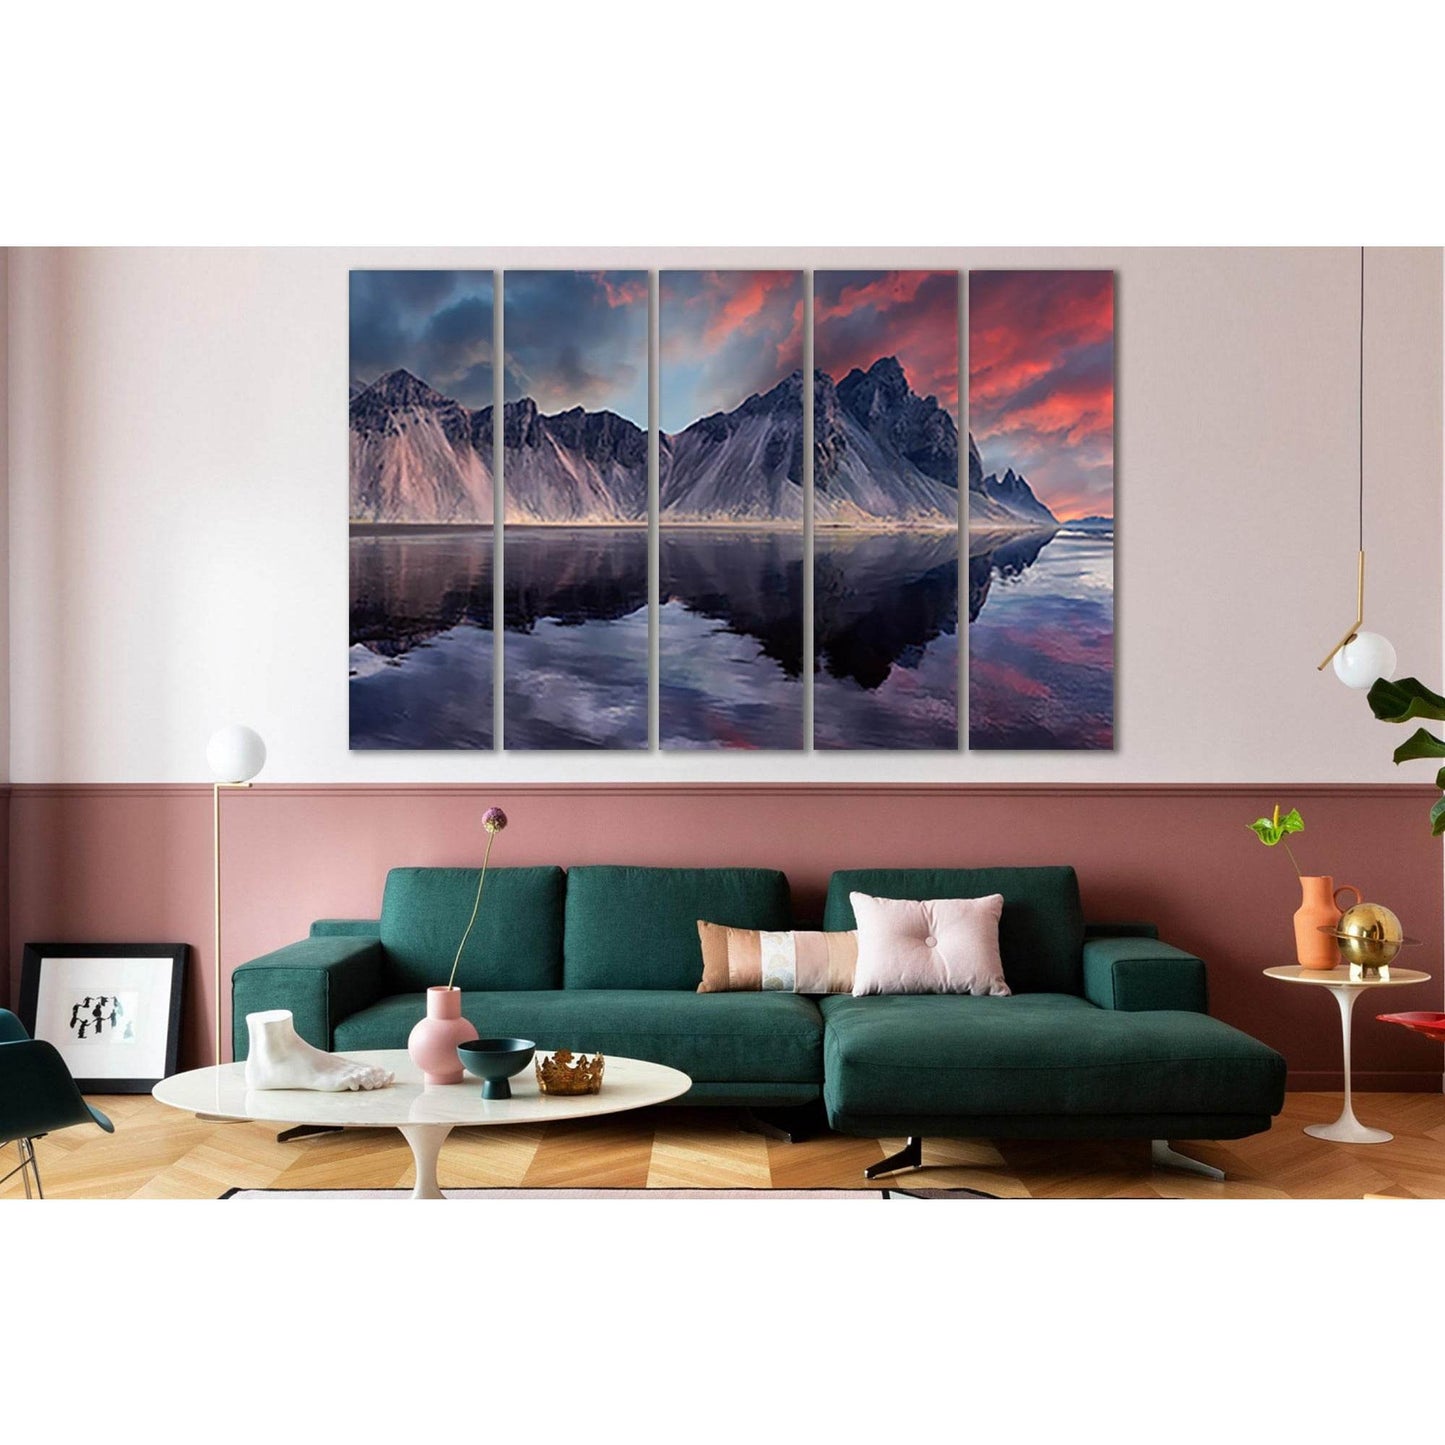 Nature's Mirror: Vestrahorn Mountain Art PrintThis canvas print captures the dramatic skies and stark beauty of Vestrahorn Mountain, reflected in the still waters below. It's a stunning piece of wall art that brings the grandeur of Icelandic landscapes in